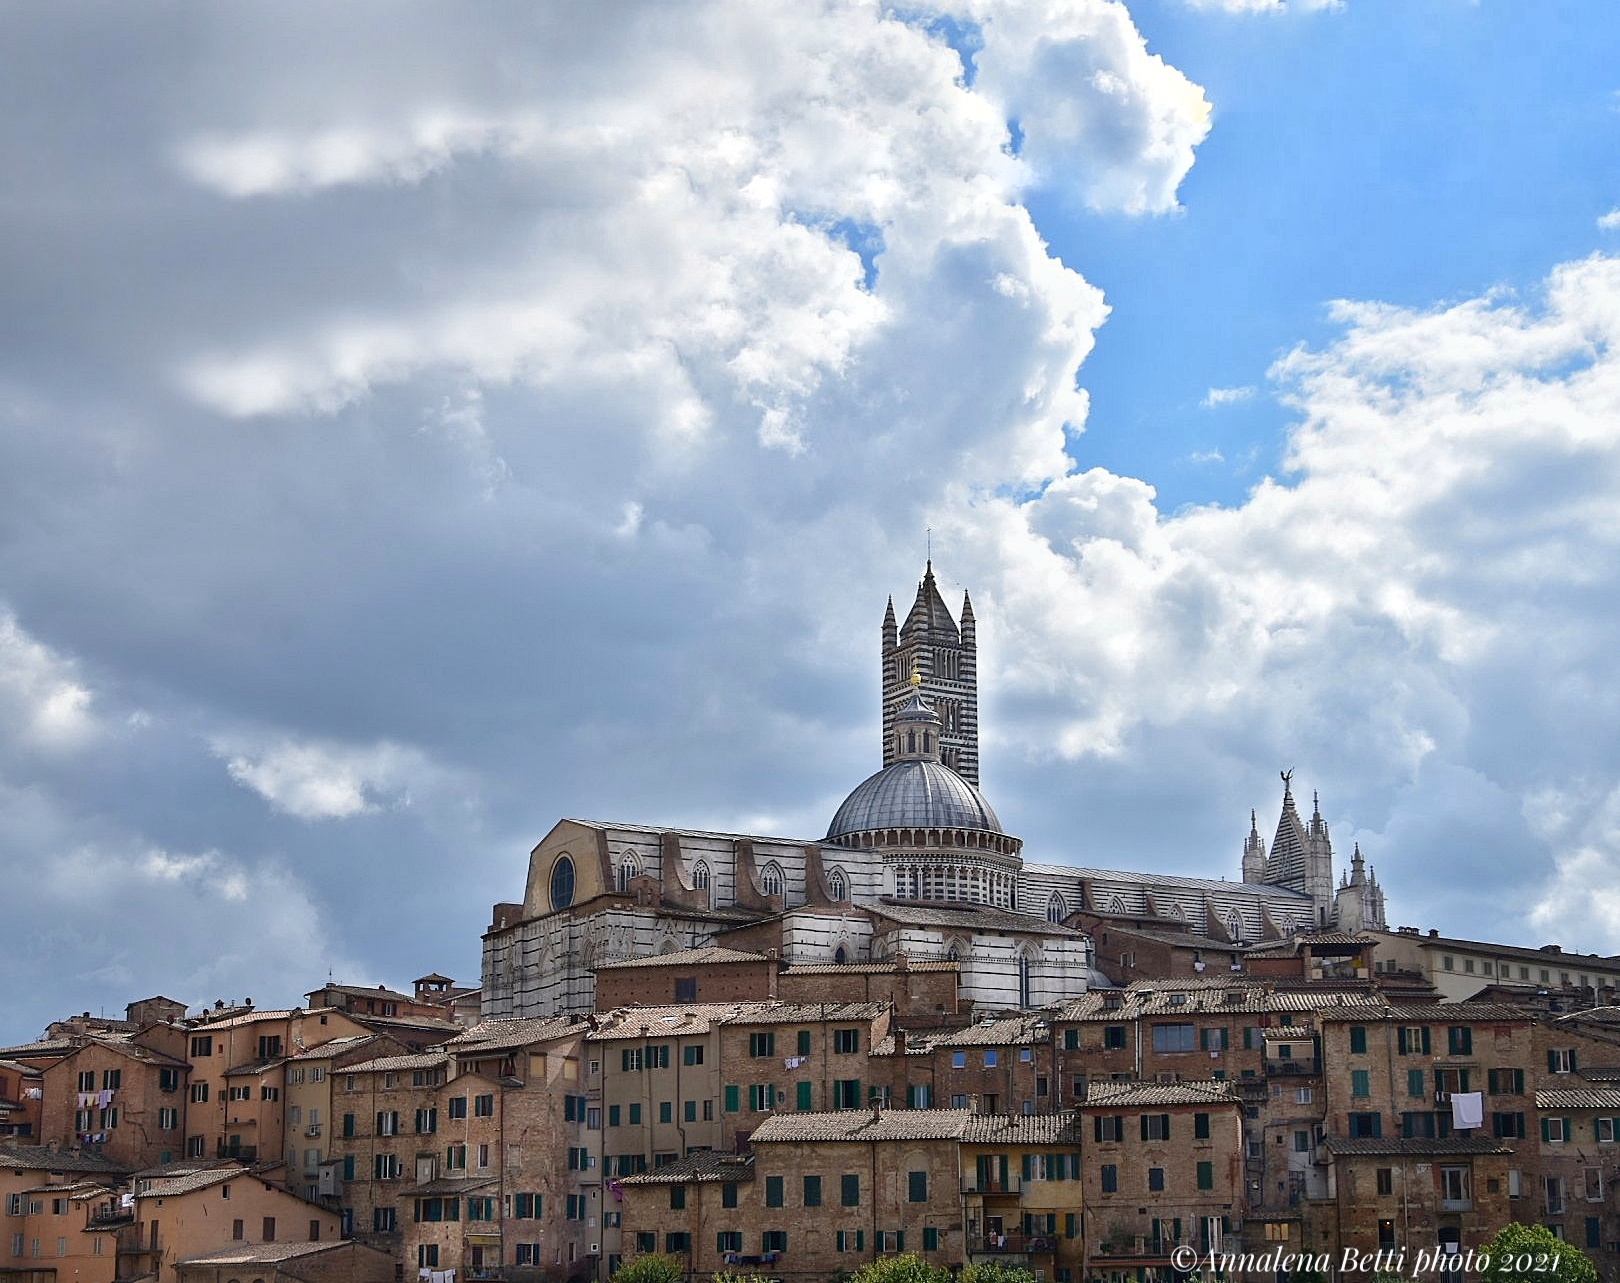 Overview of Siena with the Duomo...